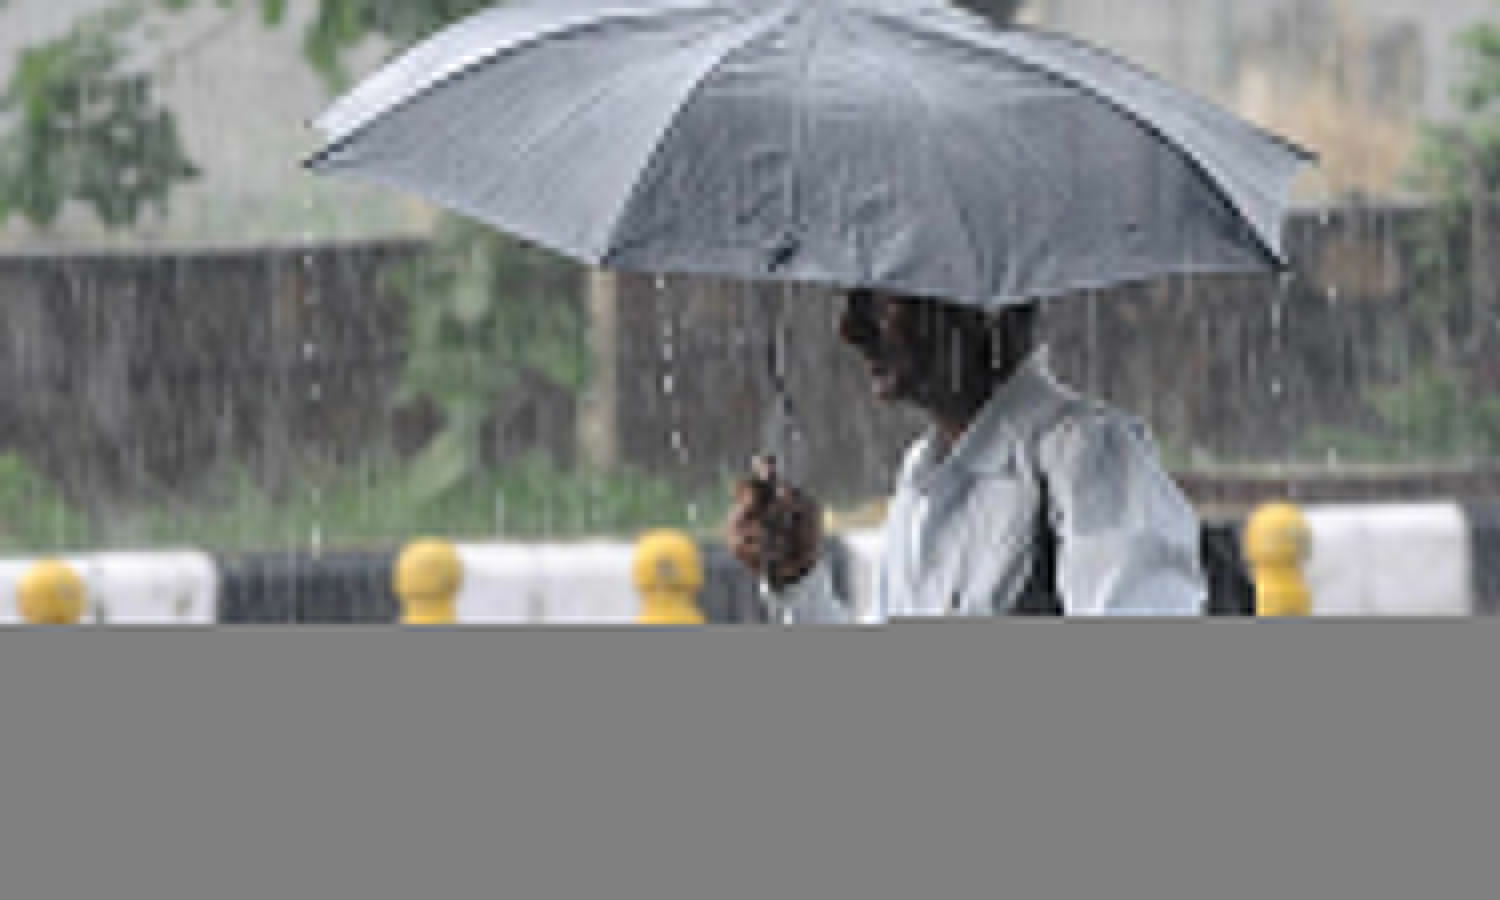 Weather Today Update: Heavy rain expected in UP today, orders to keep schools closed in many districts